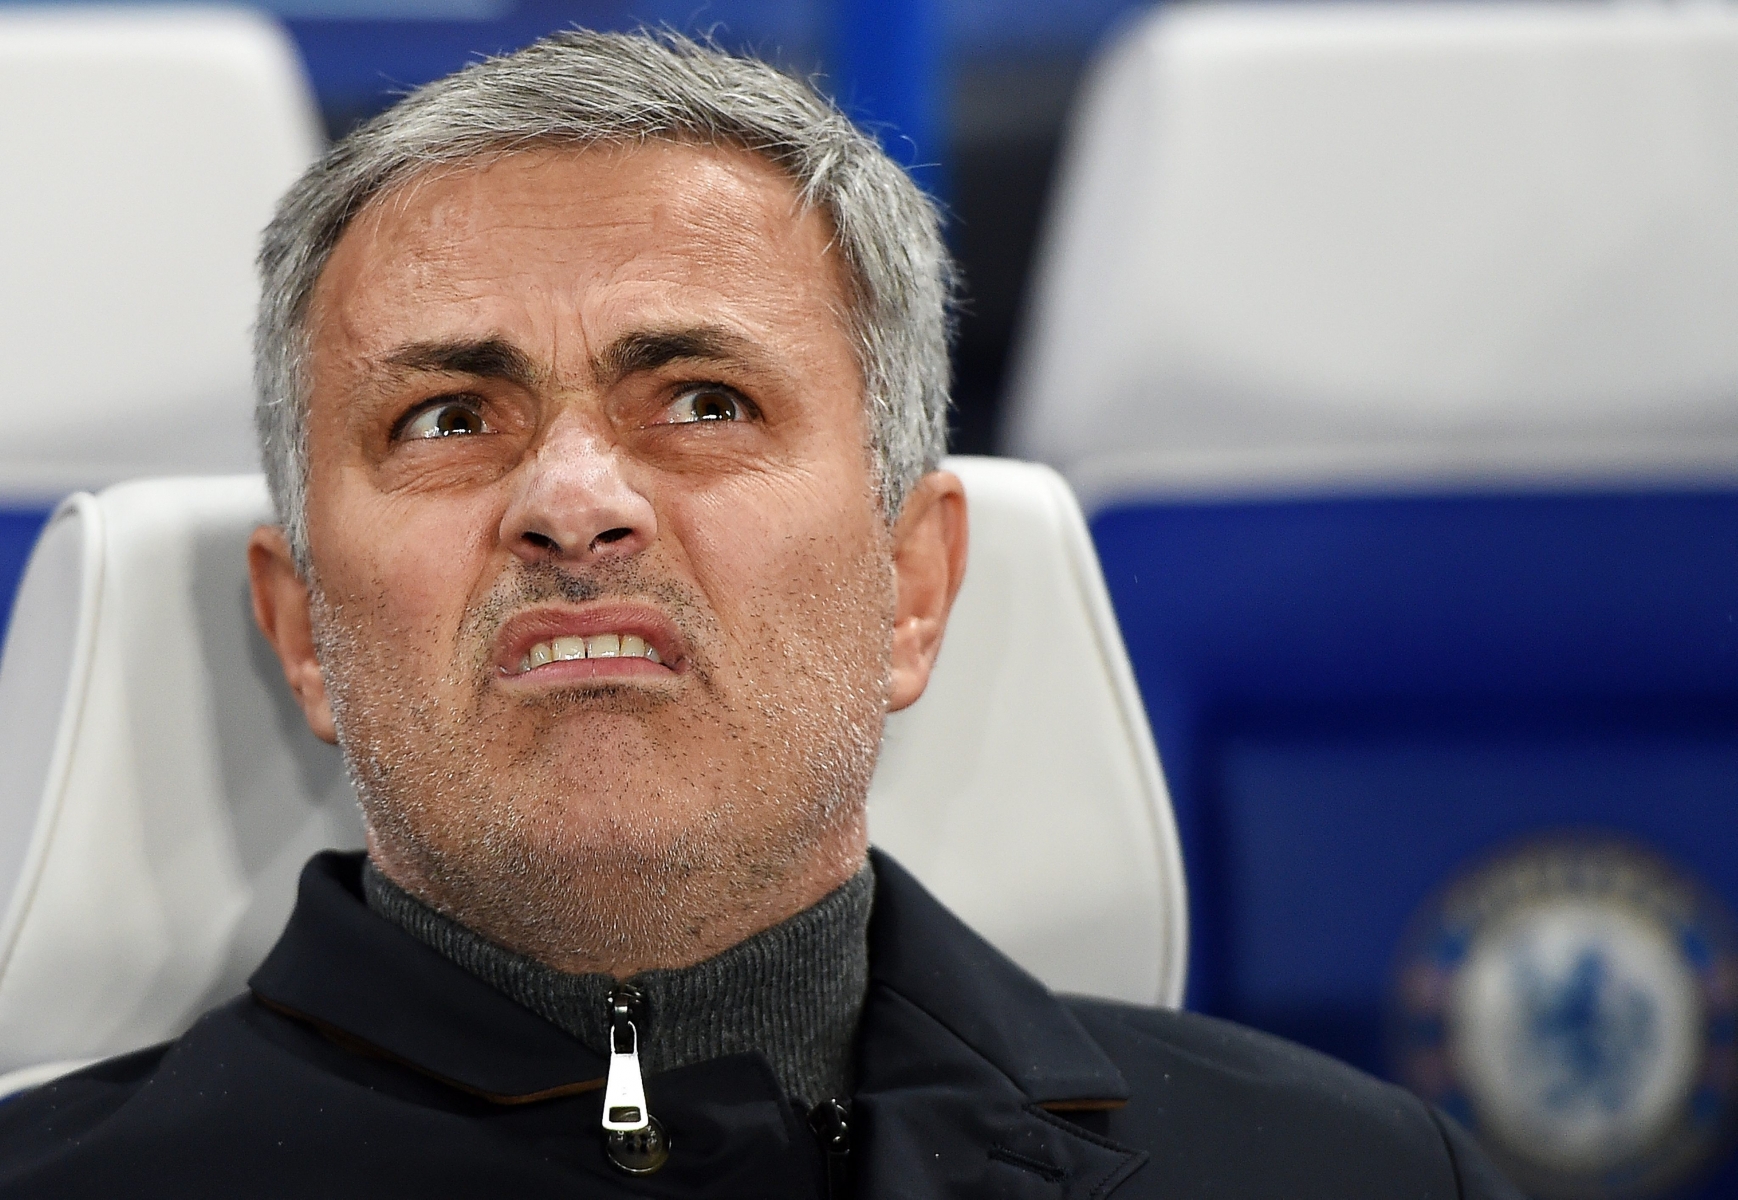 epa05072856 (FILES) A file picture dated 09 December 2015 shows Chelsea manager Jose Mourinho during the UEFA Champions Leagues group G soccer match against FC Porto at Stamford Bridge in London, Britain. Chelsea manager Mourinho has been sacked on 17 December 2015.  EPA/ANDY RAIN FILE BRITAIN SOCCER MOURINHO SACKED